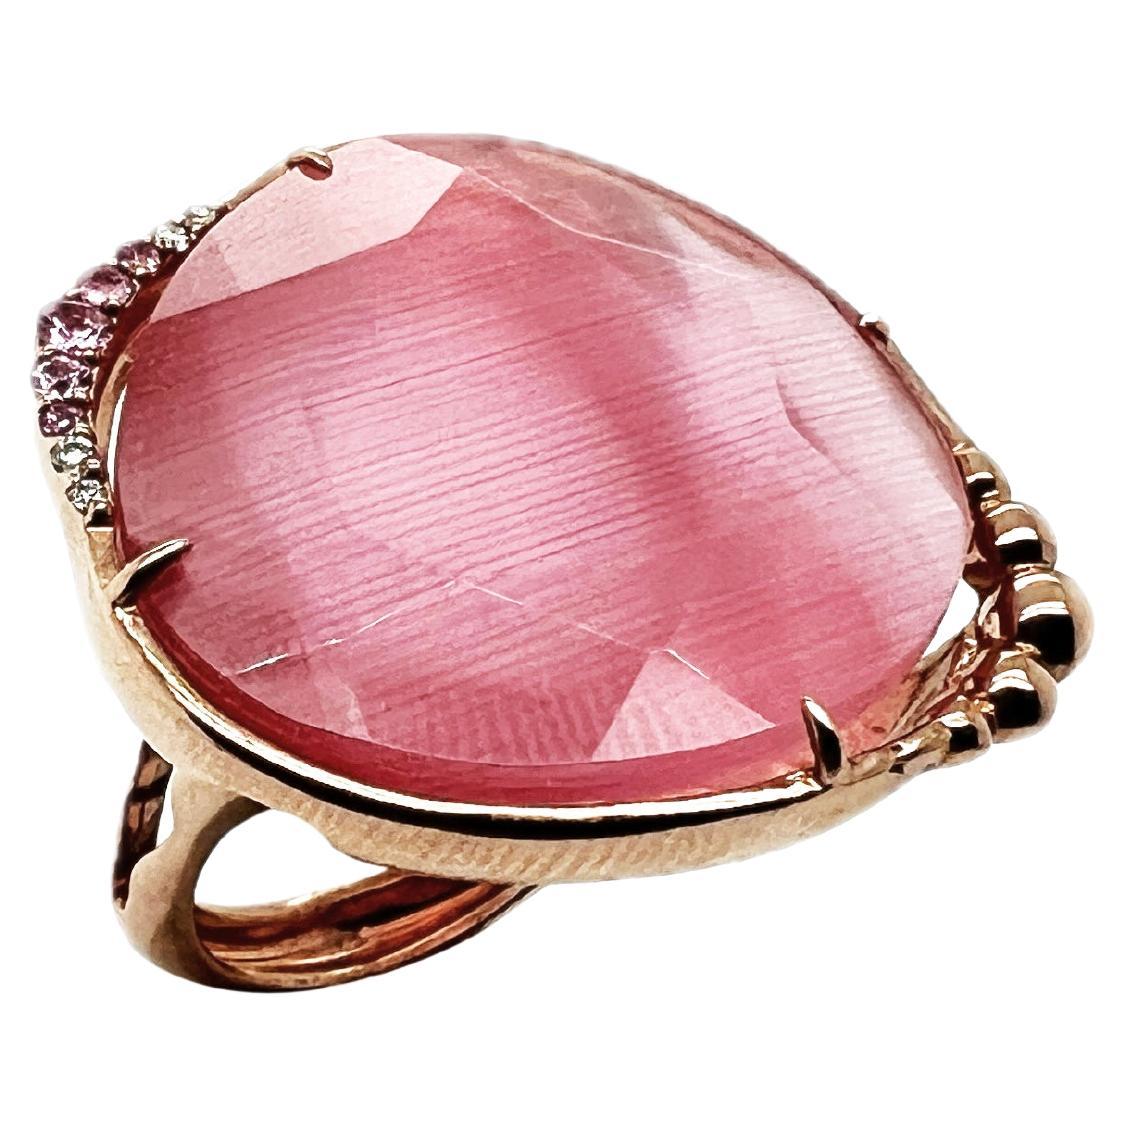 Ring Doublets (optic fiber & rock crystal), 9K gold, pink sapphires and diamonds